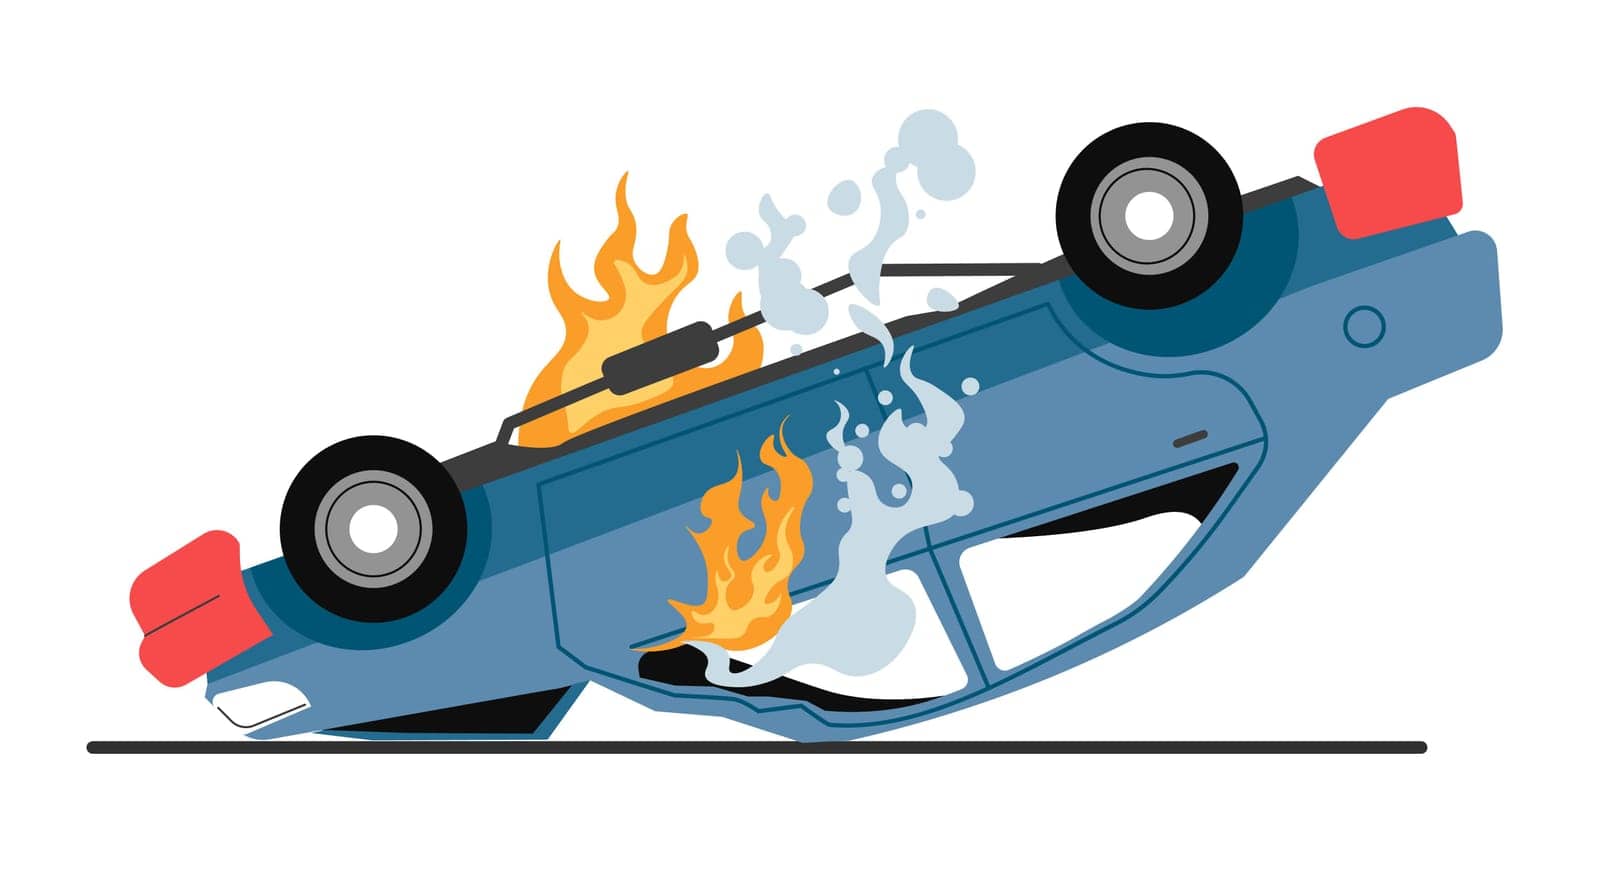 Damaged car burning on road, isolated vehicle with flames and smoke. Road incident, vehicle crash or traffic accident. Catastrophe on highway, dangerous automobile break. Arson or vandalism vector